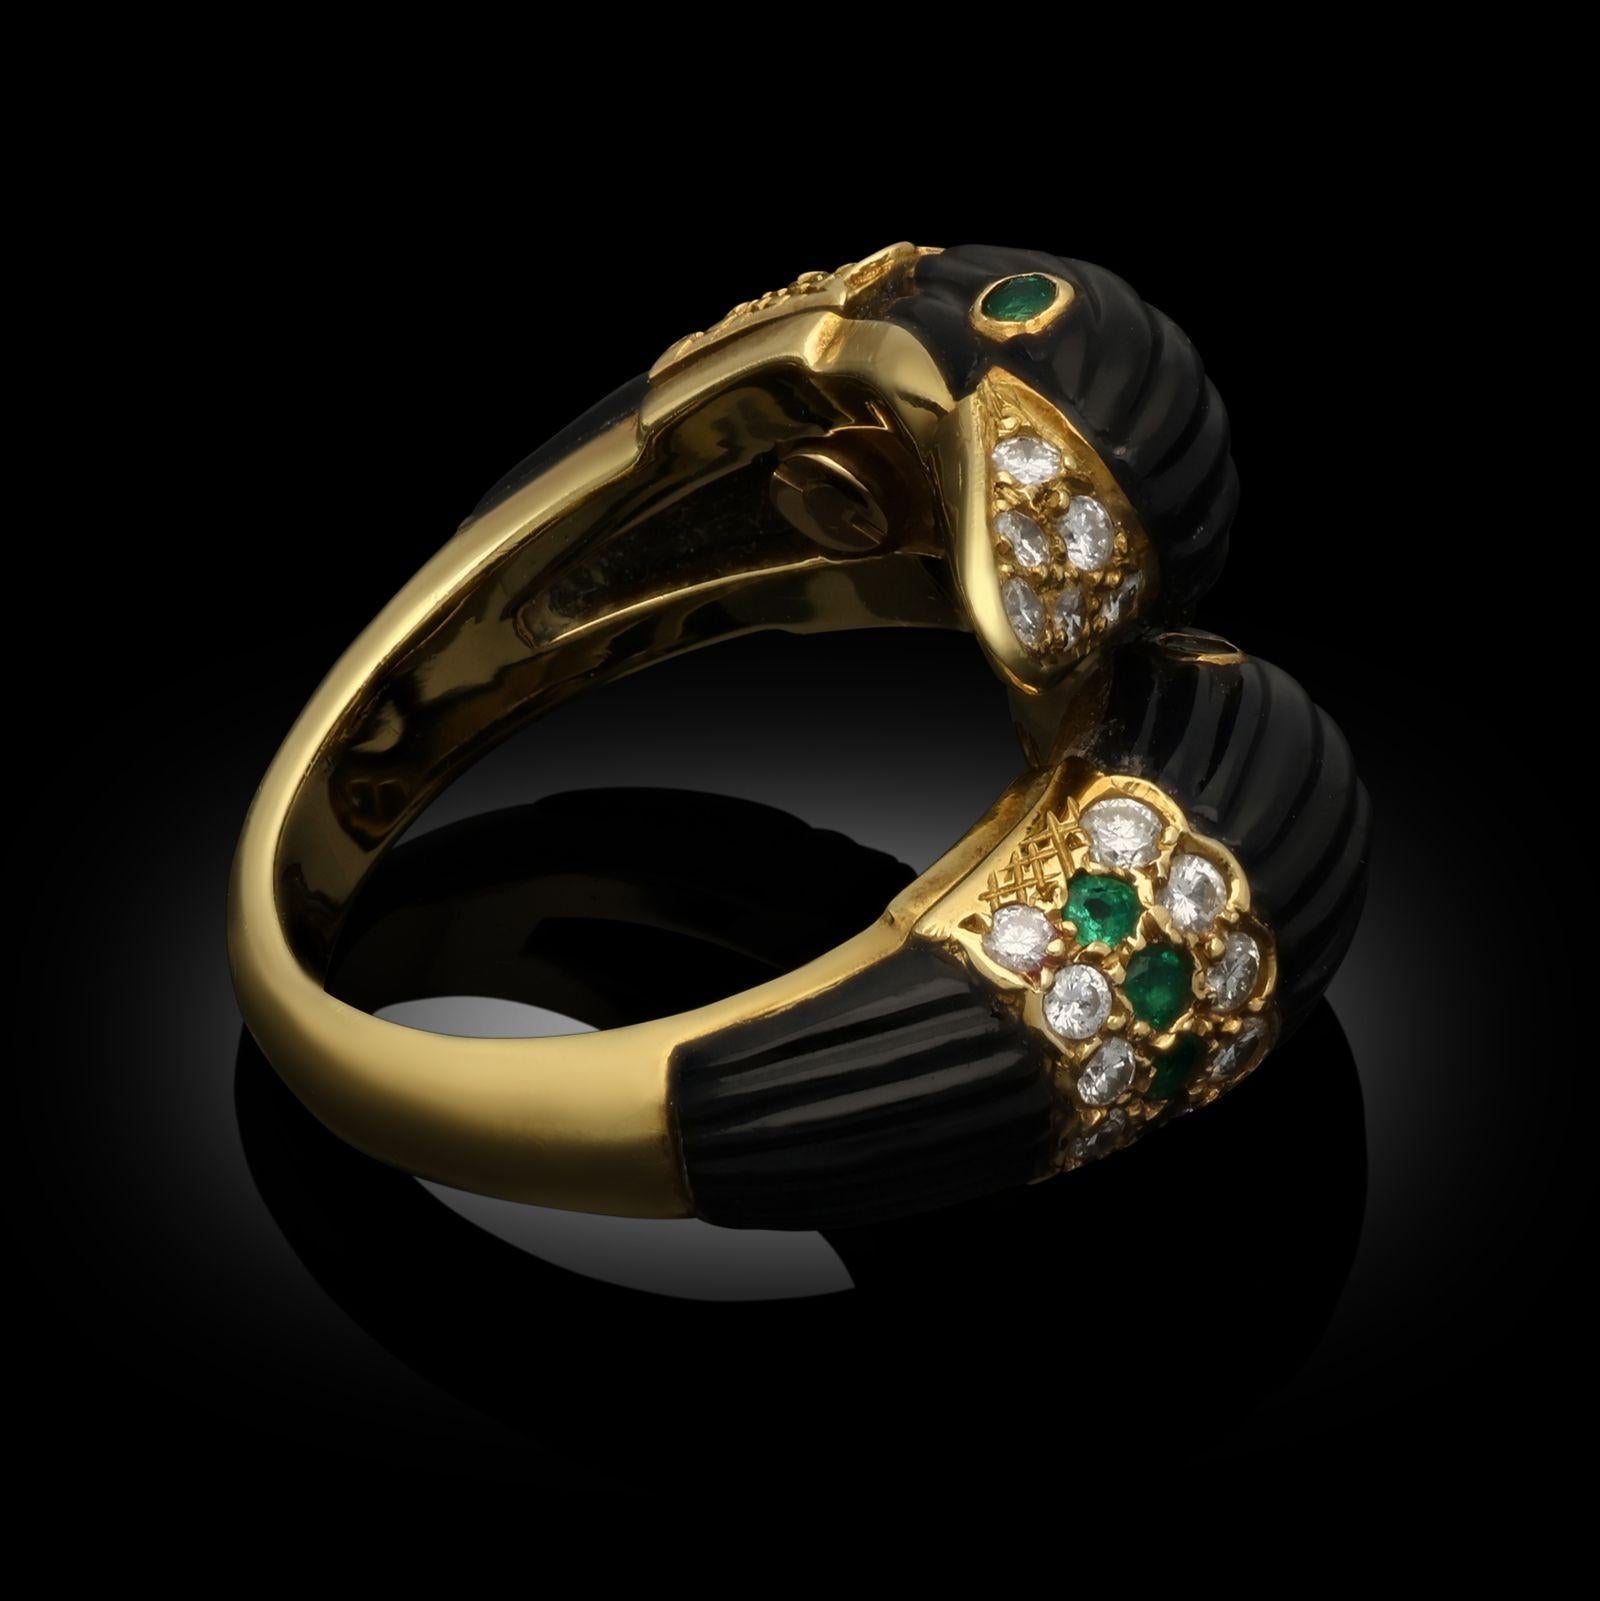 A whimsical double headed swan ring by Van Cleef & Arpels c.1970s, the bypass style ring in 18ct yellow gold designed as two matching swans heads crossing over each other and facing opposite directions, formed of carved and fluted black onyx, the